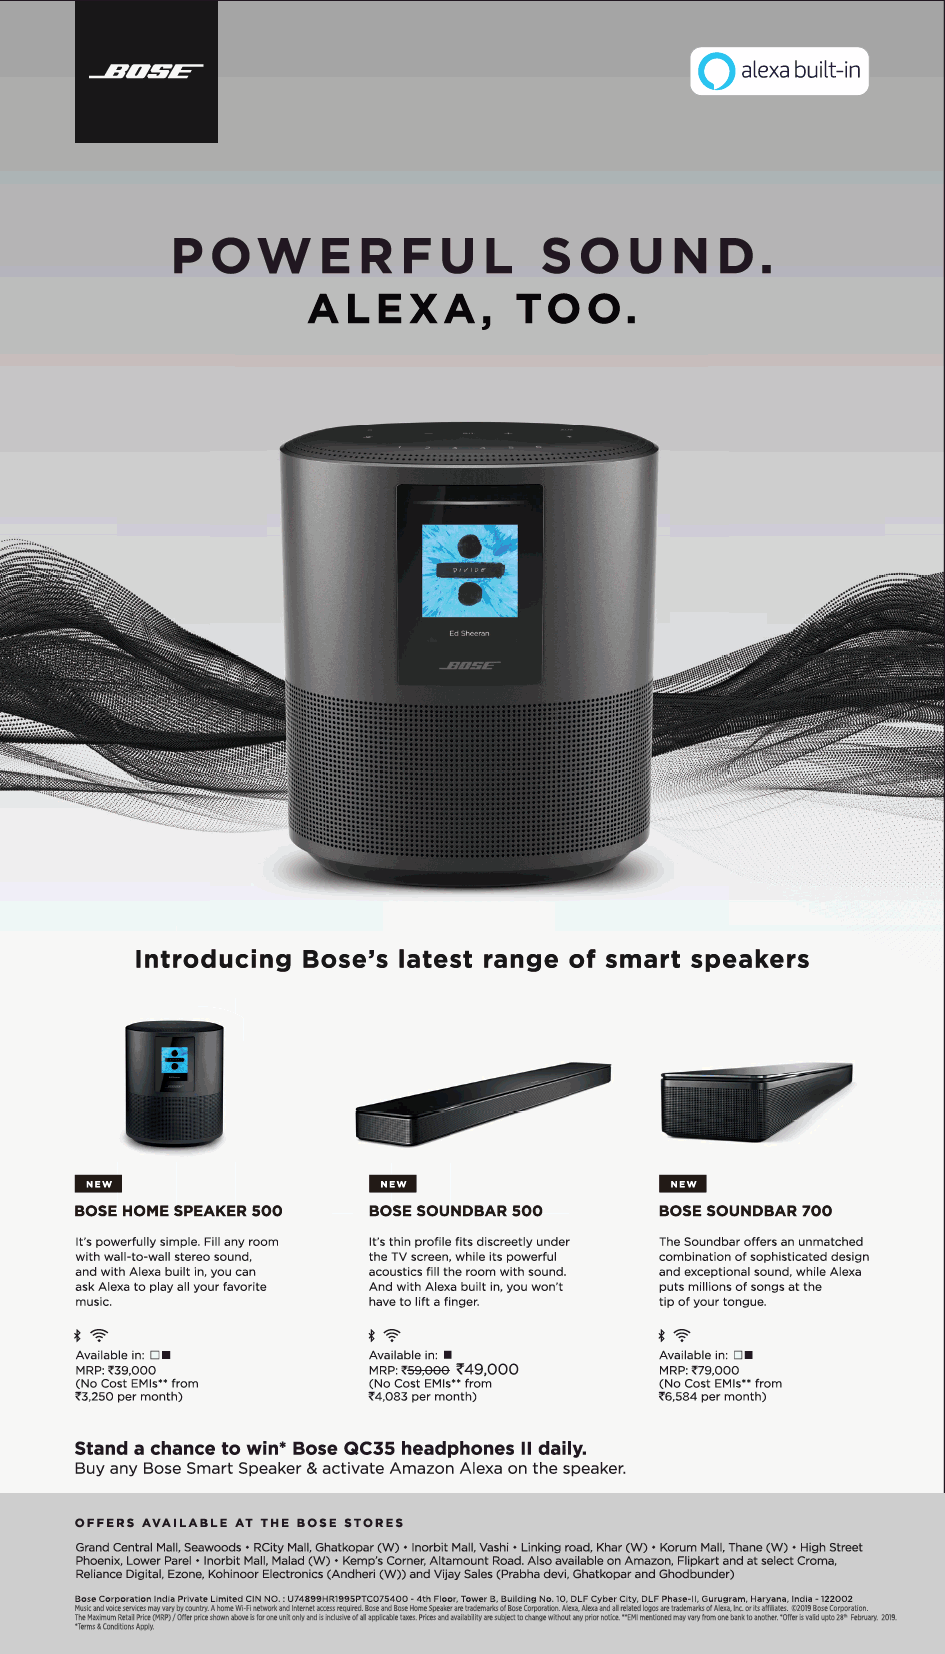 bose-speakers-powerful-sound-alexa-too-ad-bombay-times-02-02-2019.png